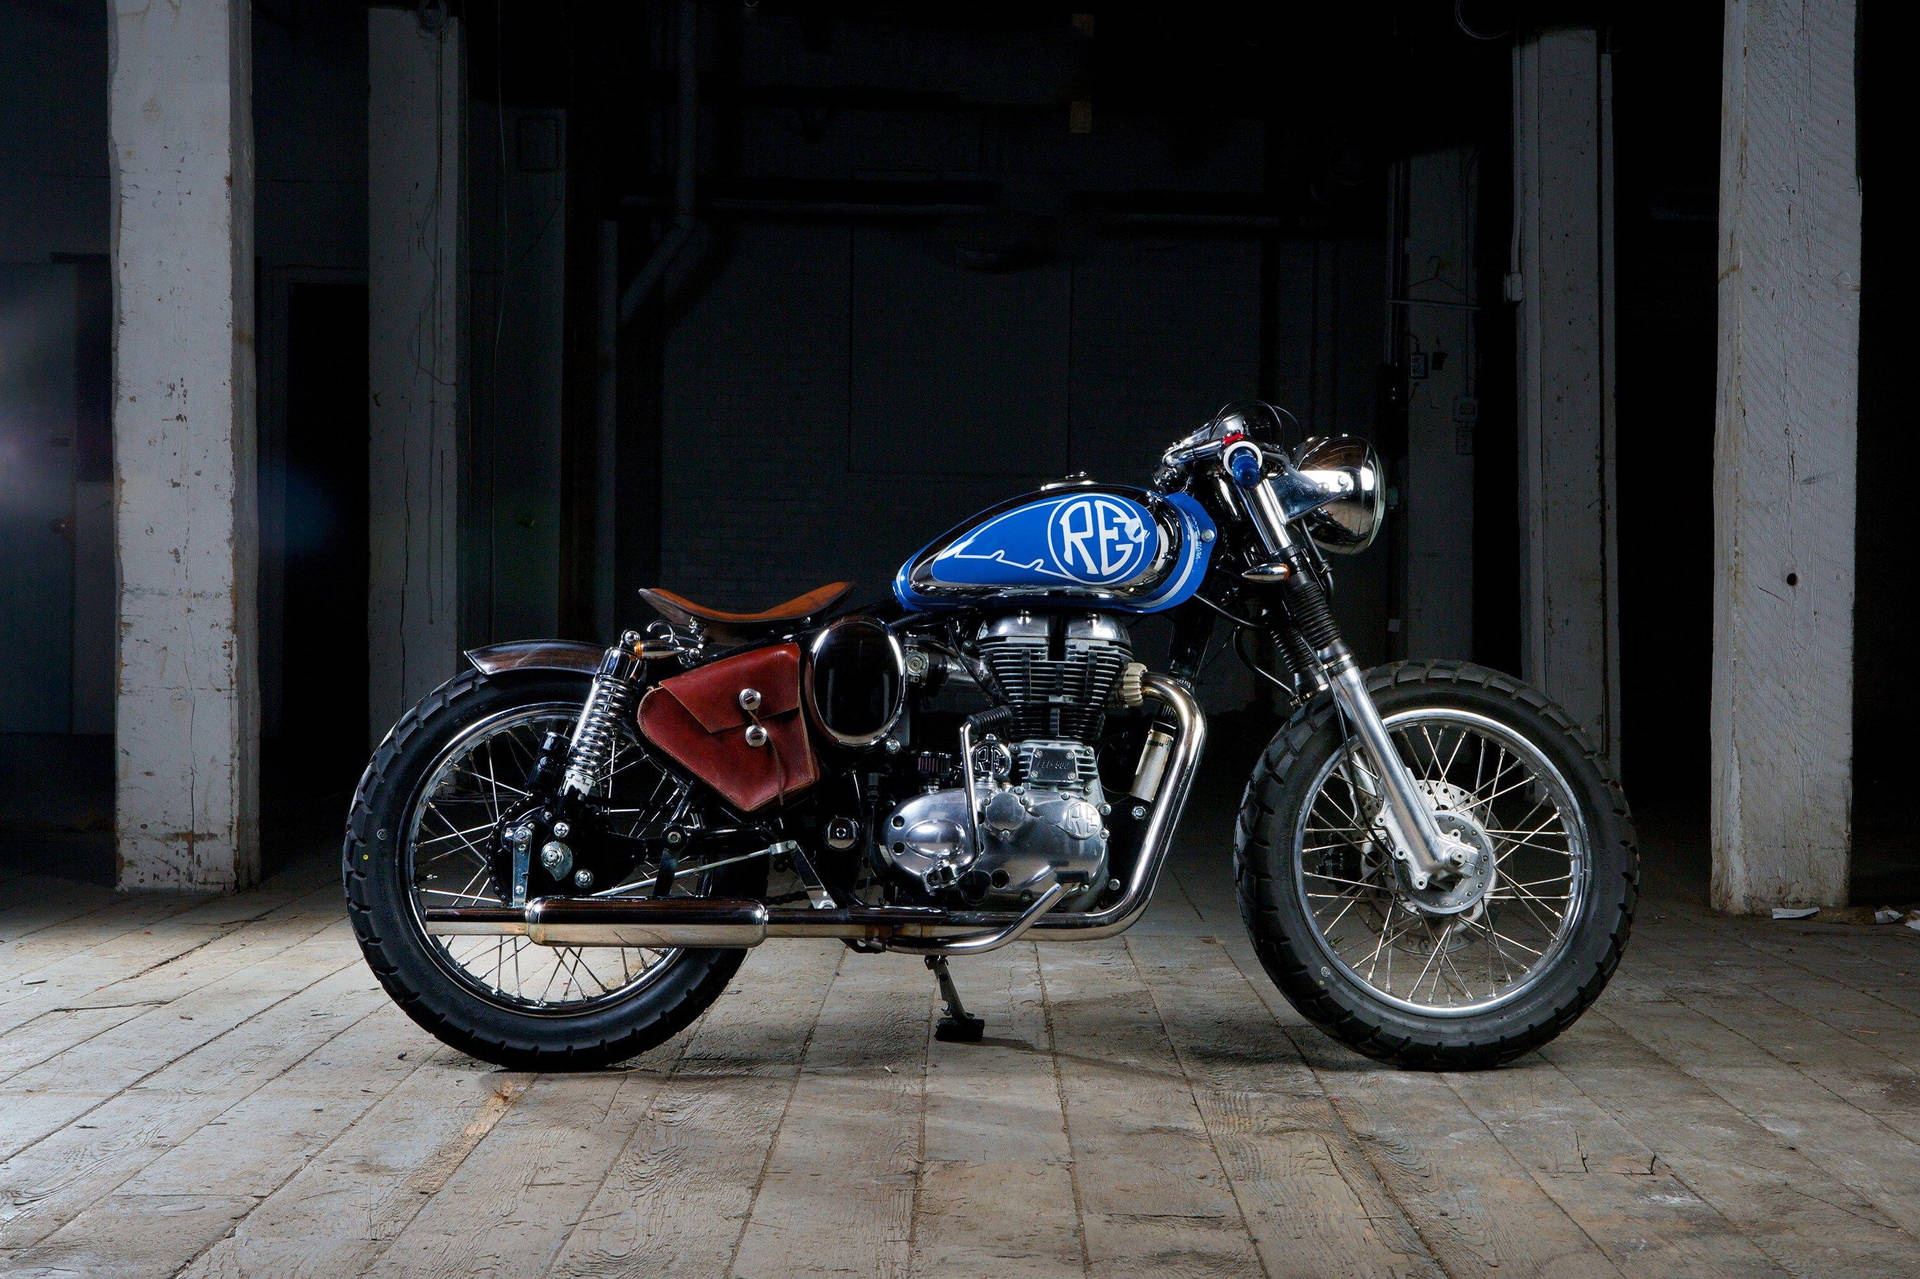 Vintage Vibes - Beachside With The Royal Enfield Hd Bobber